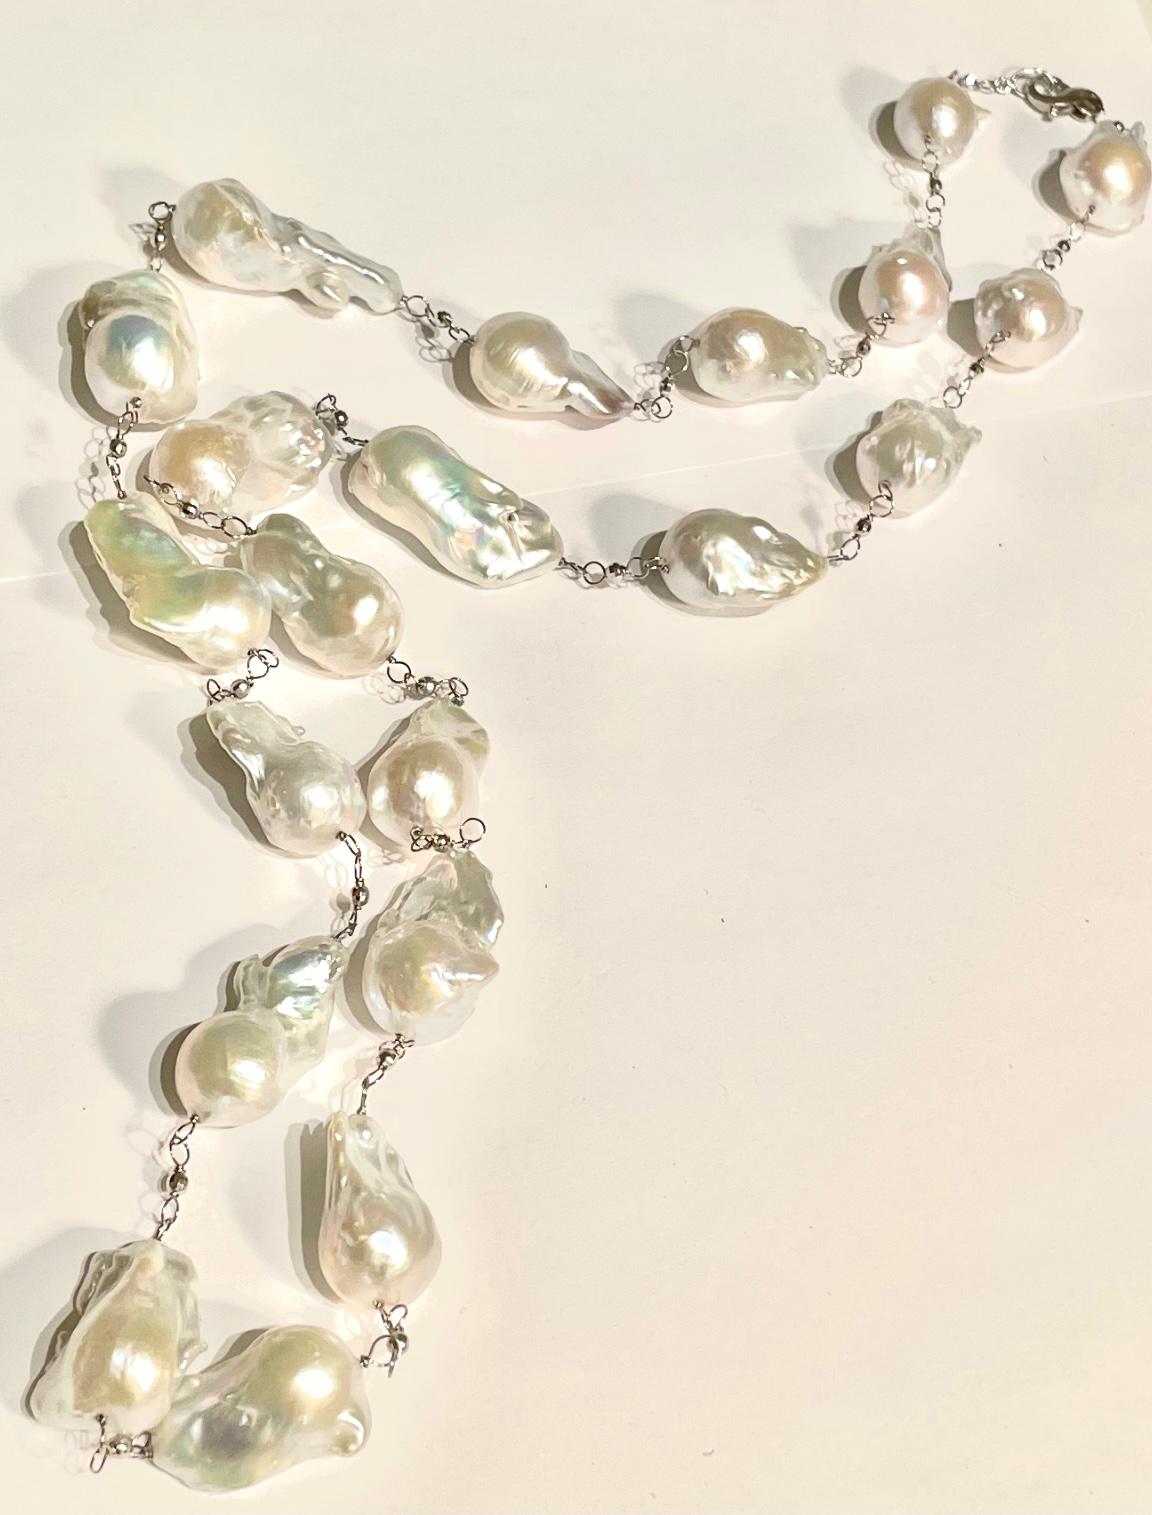 Description
Large white high-luster baroque freshwater pearls 23mm to 39mm, 14k white gold. Can be doubled.
Item # N3367

Materials and Weight
Freshwater Baroque pearls (21 pieces), 23 to 29 mm
14k white gold 3mm faceted balls.
14k white gold with